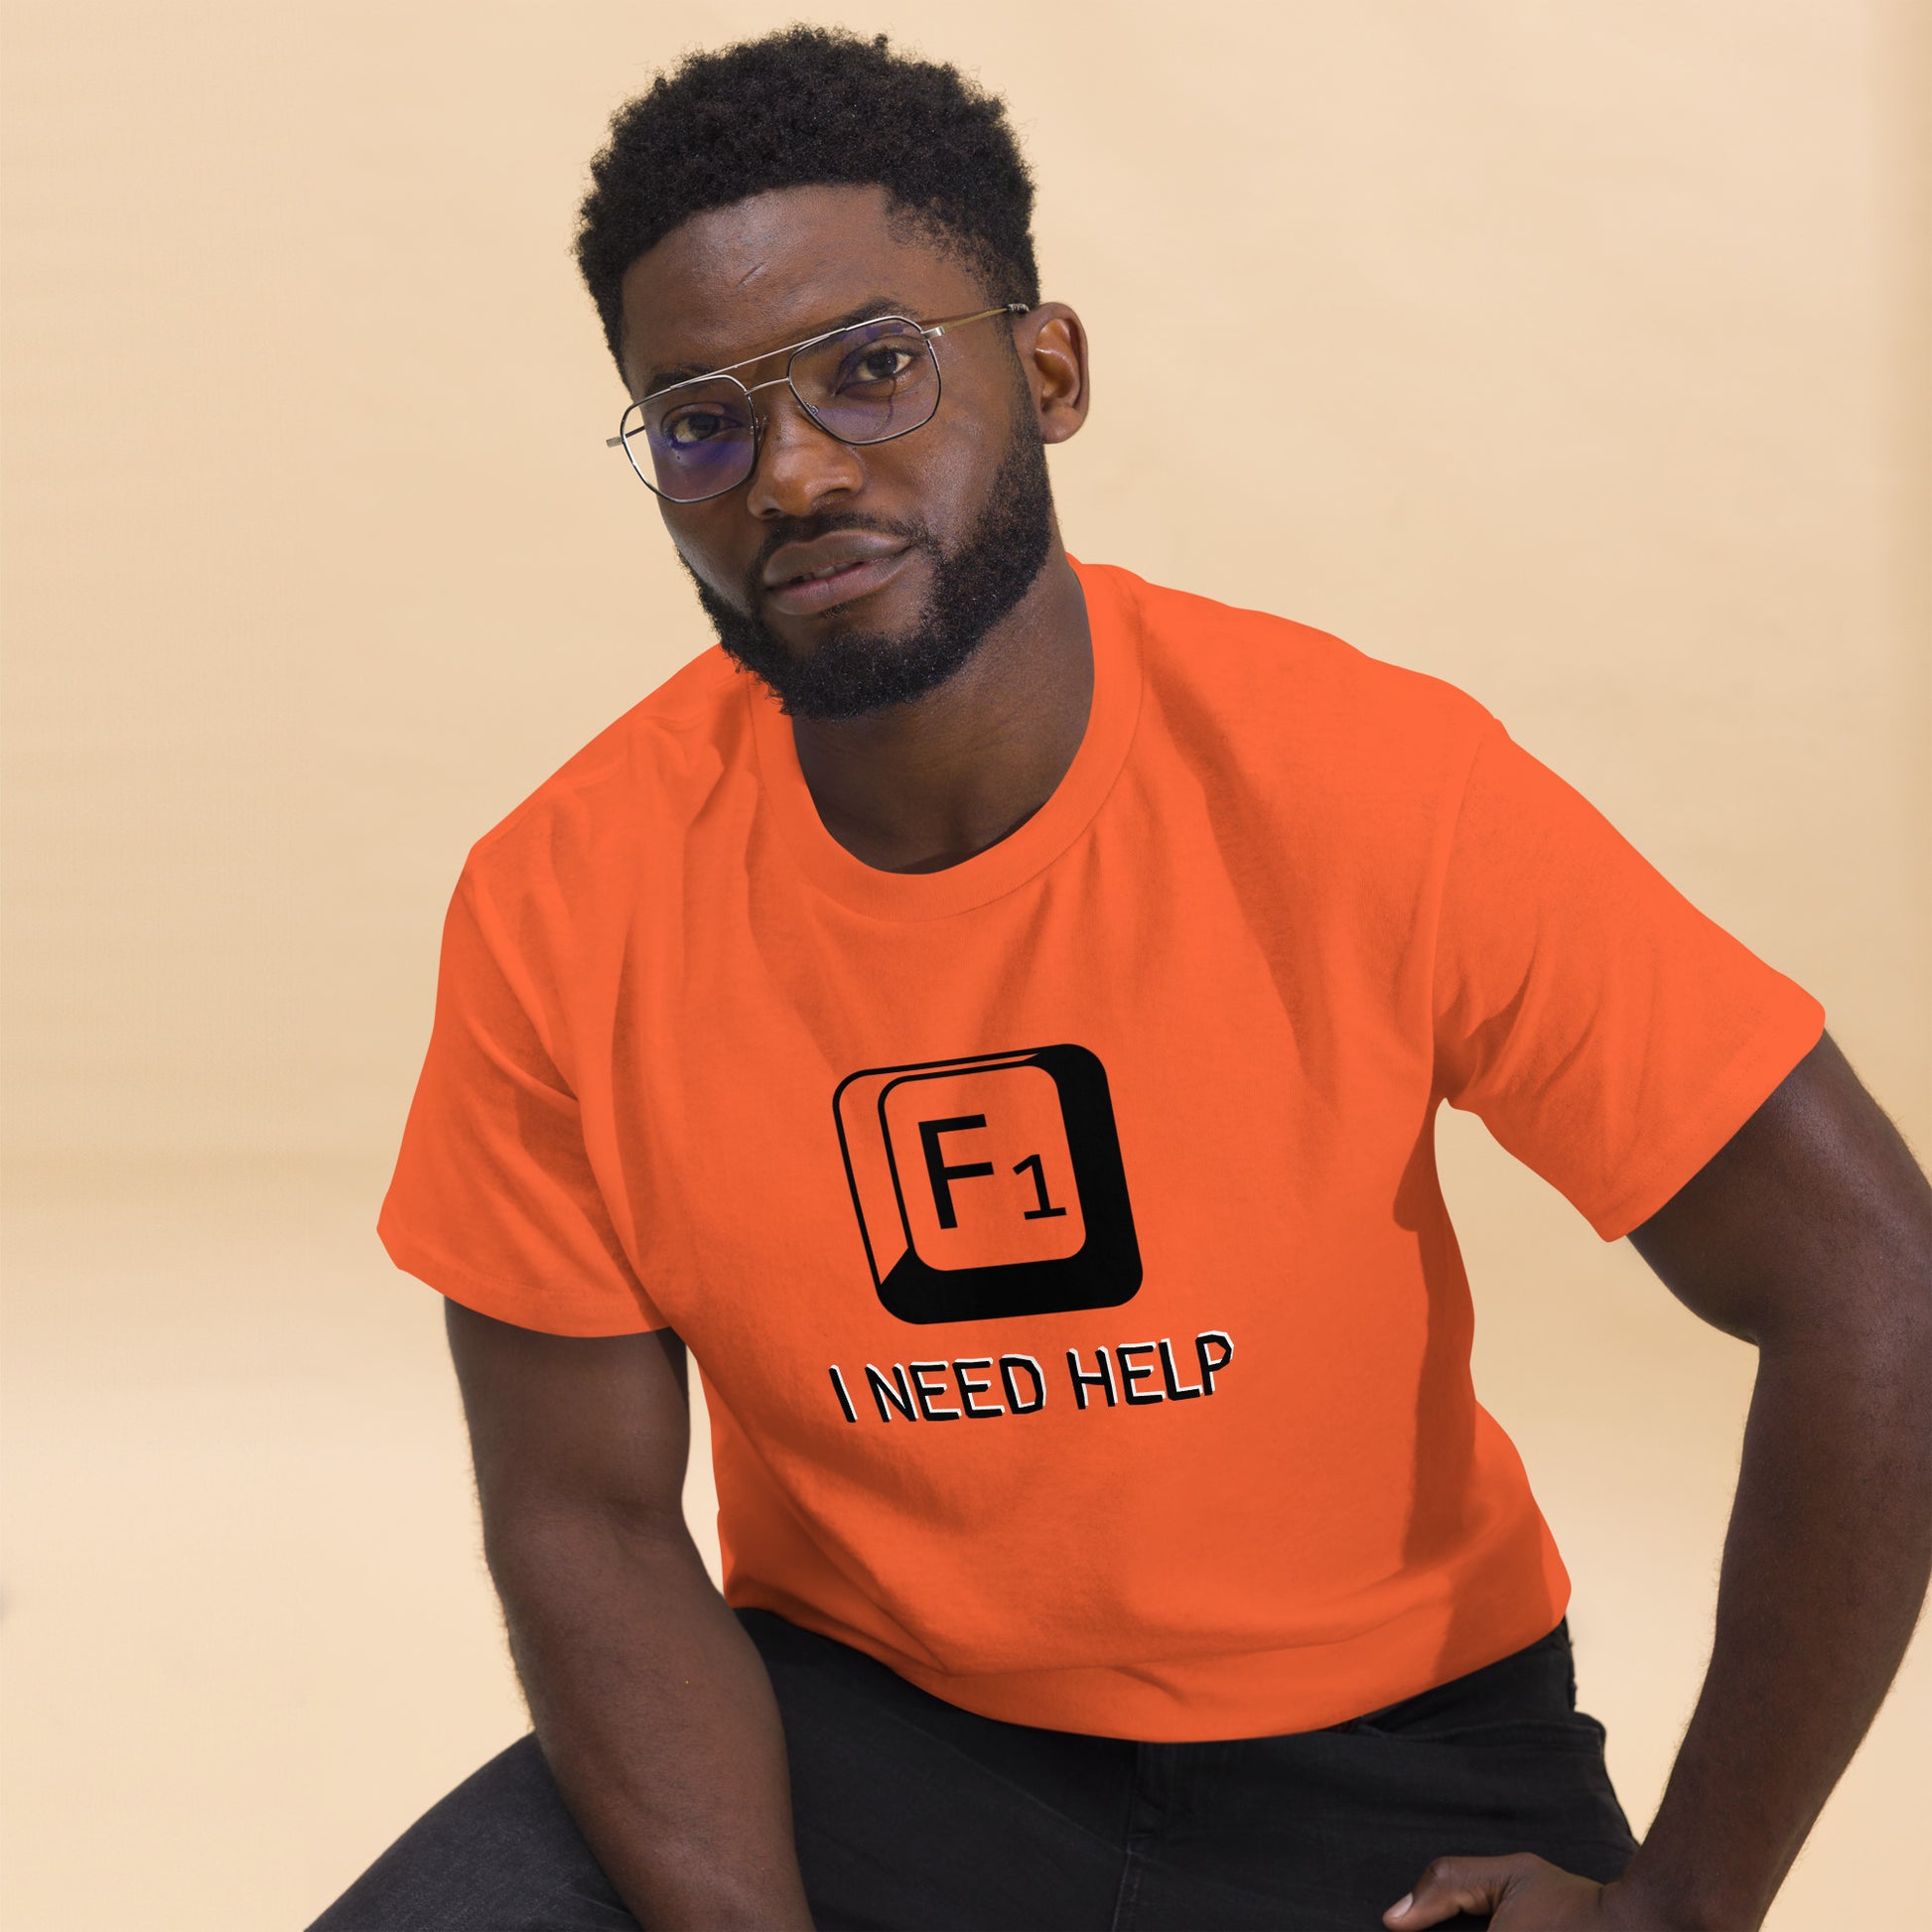 Men with Orange T-shirt and a picture of F1 key with text "I need help"